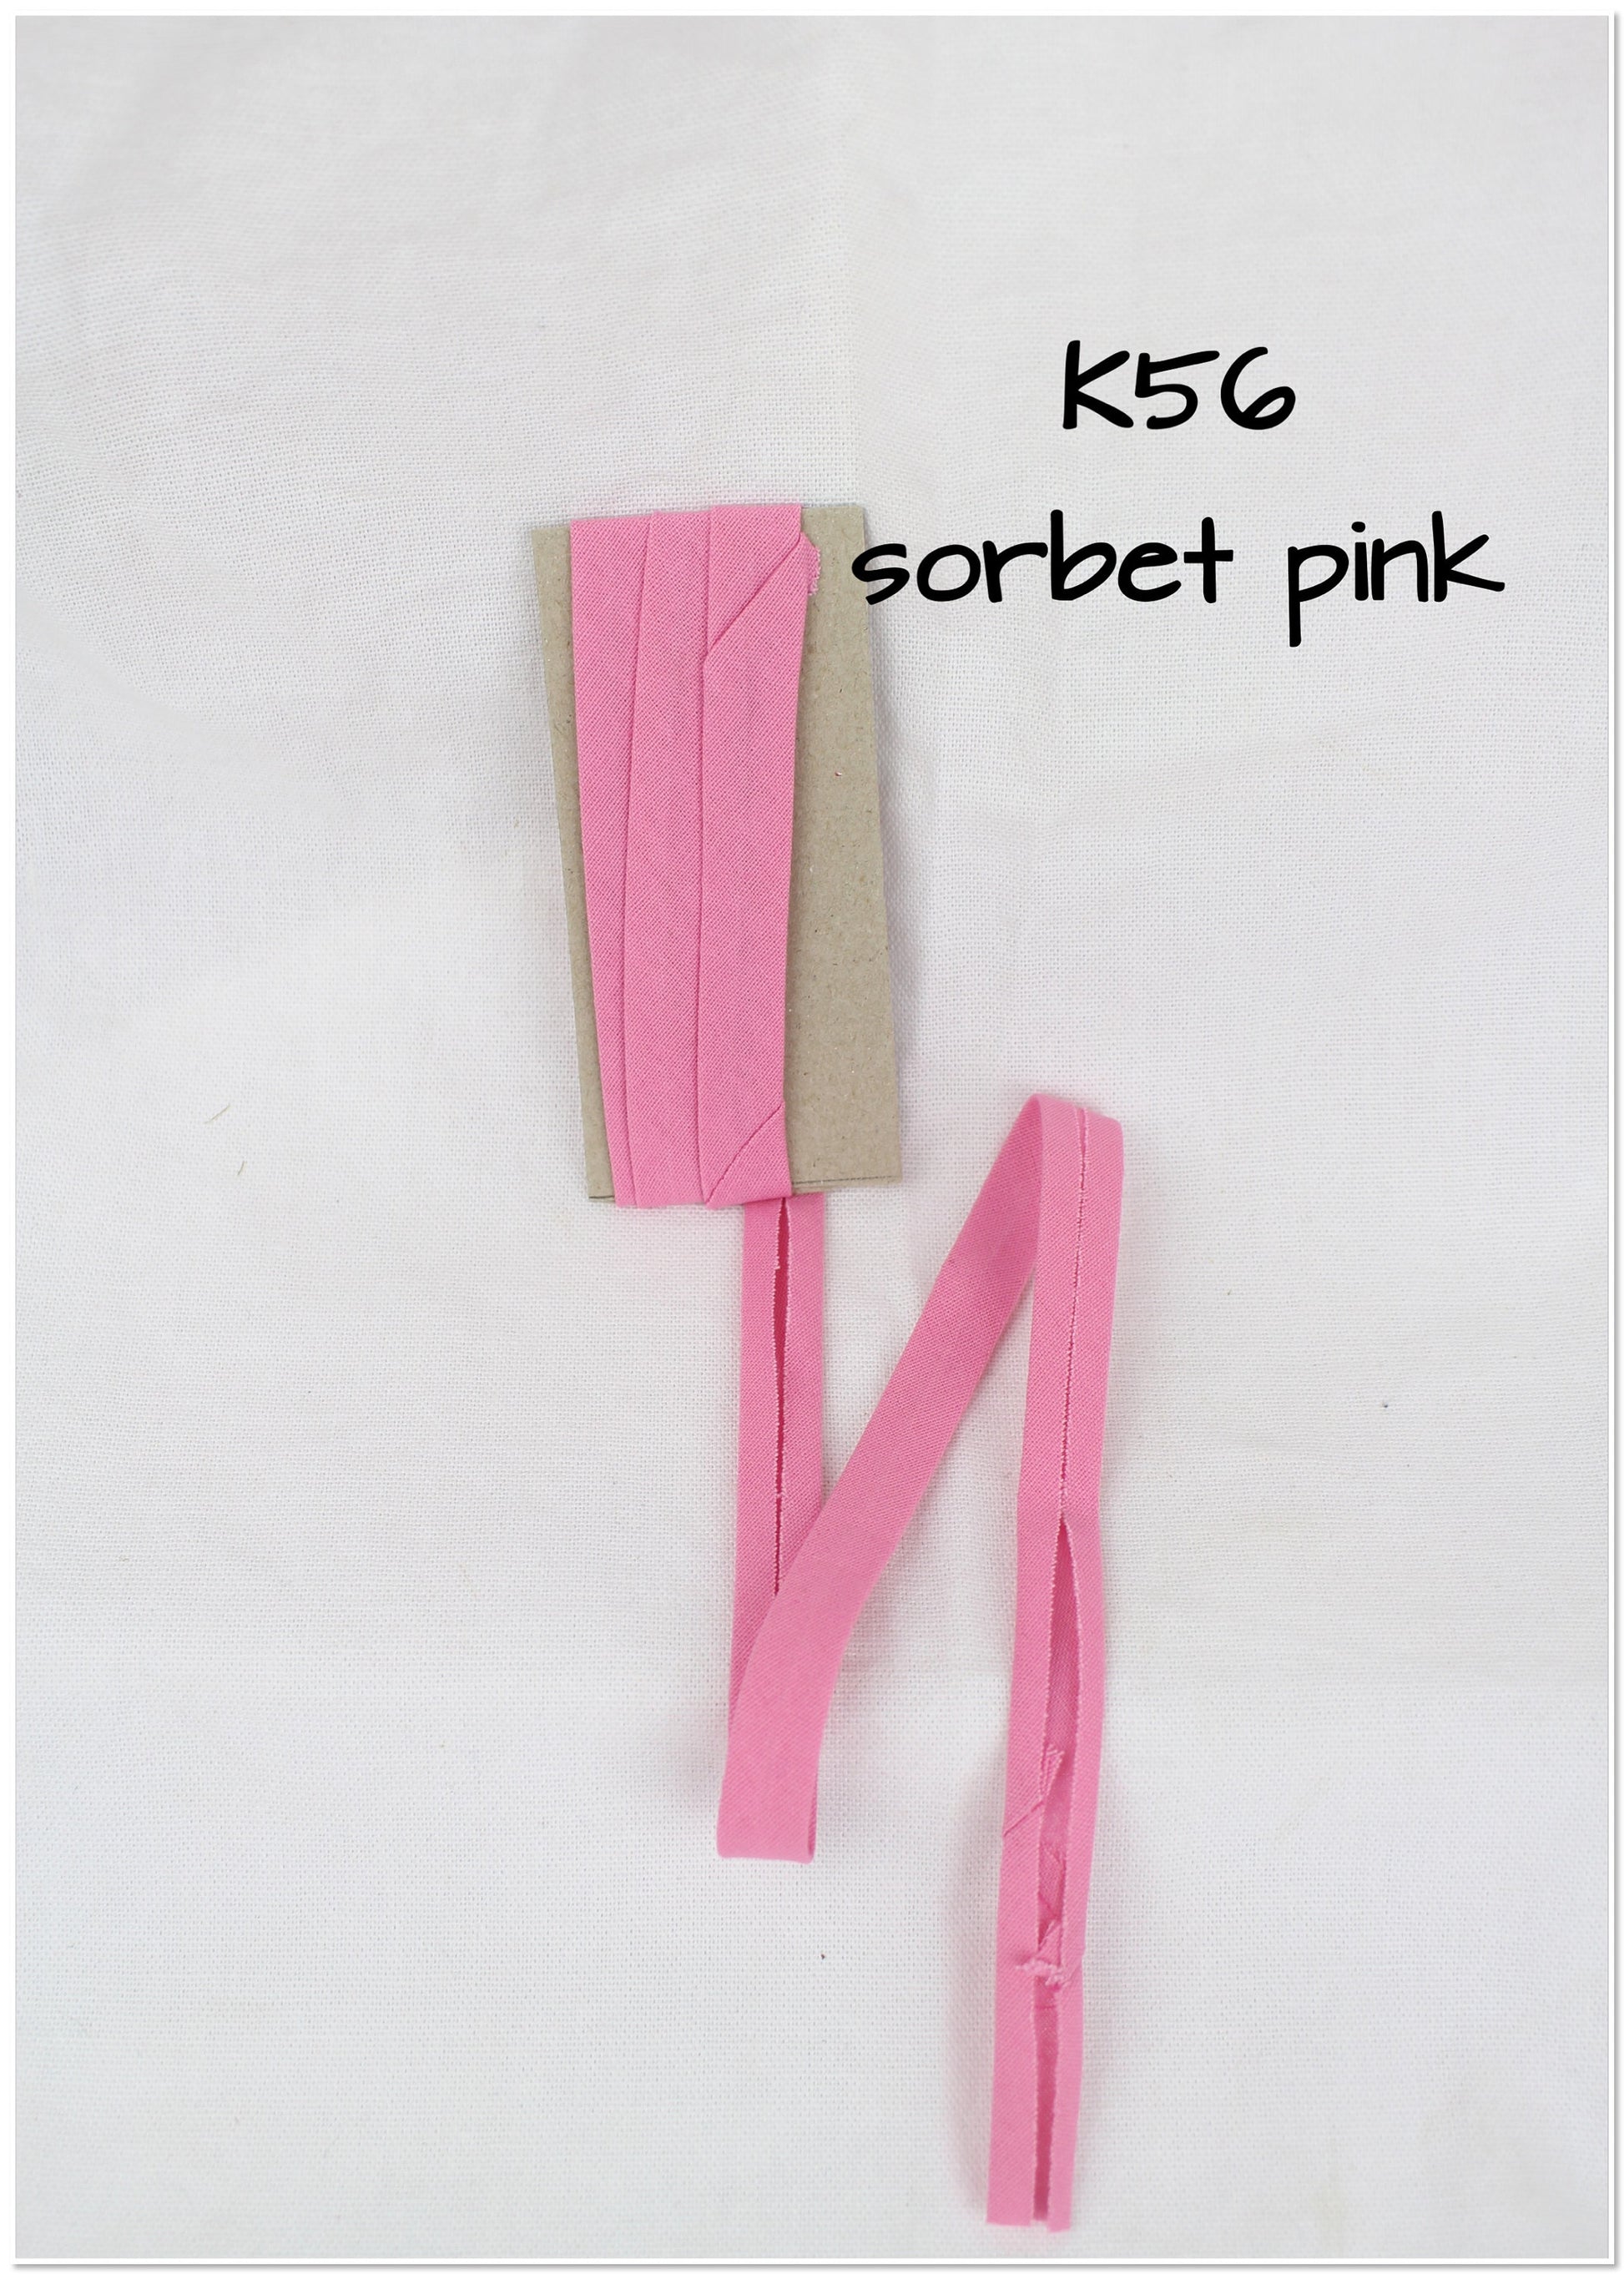 Bias Binding (tape) 12mm, single fold. candy, pink, sorbet pink, cerise, hot pink, baby pink. Fusible iron on available. 100% cotton